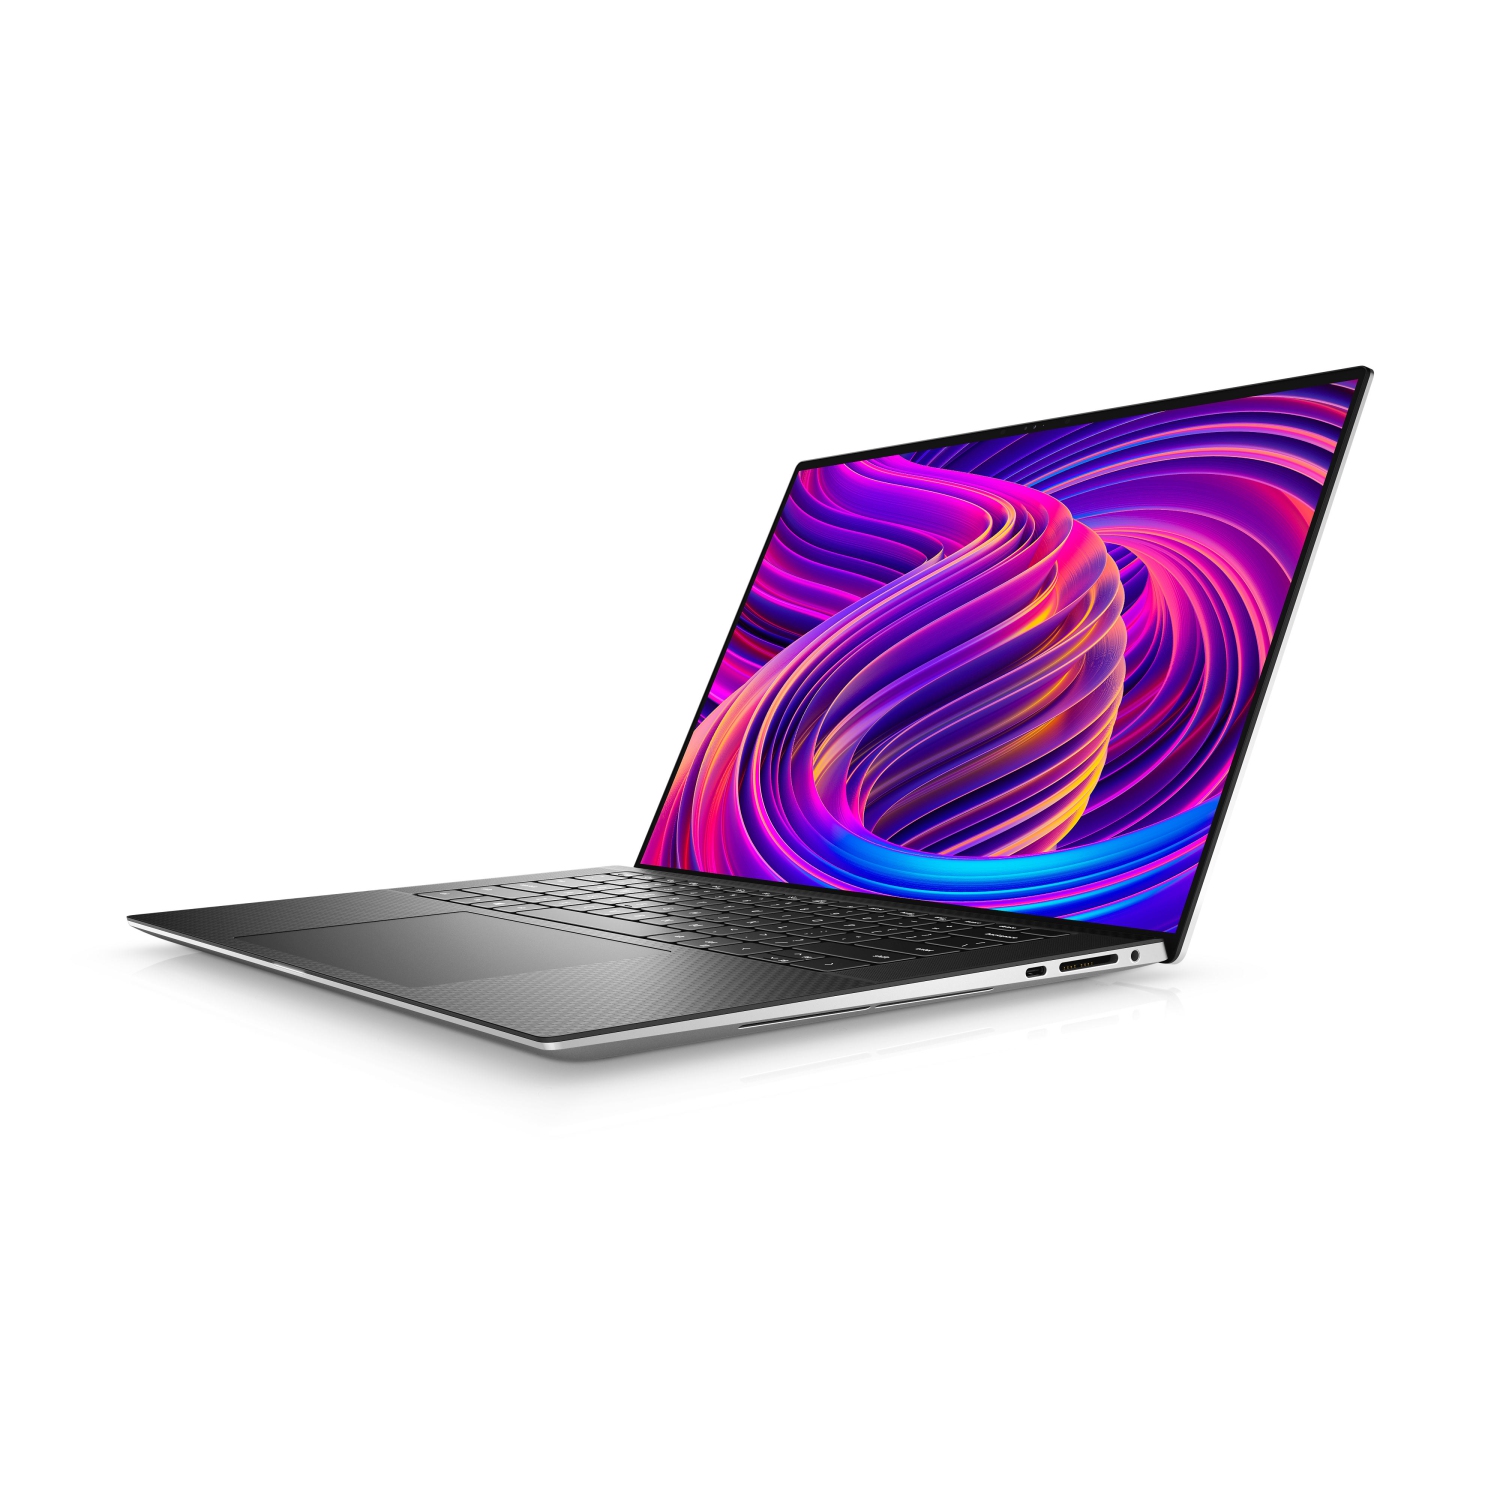 Refurbished (Excellent) - Dell XPS 15 9510 Laptop (2021), 15.6" 4K Touch, Core i9 - 256GB SSD - 16GB RAM - 3050 Ti, 8 Cores @ 4.9 GHz - 11th Gen CPU Certified Refurbished